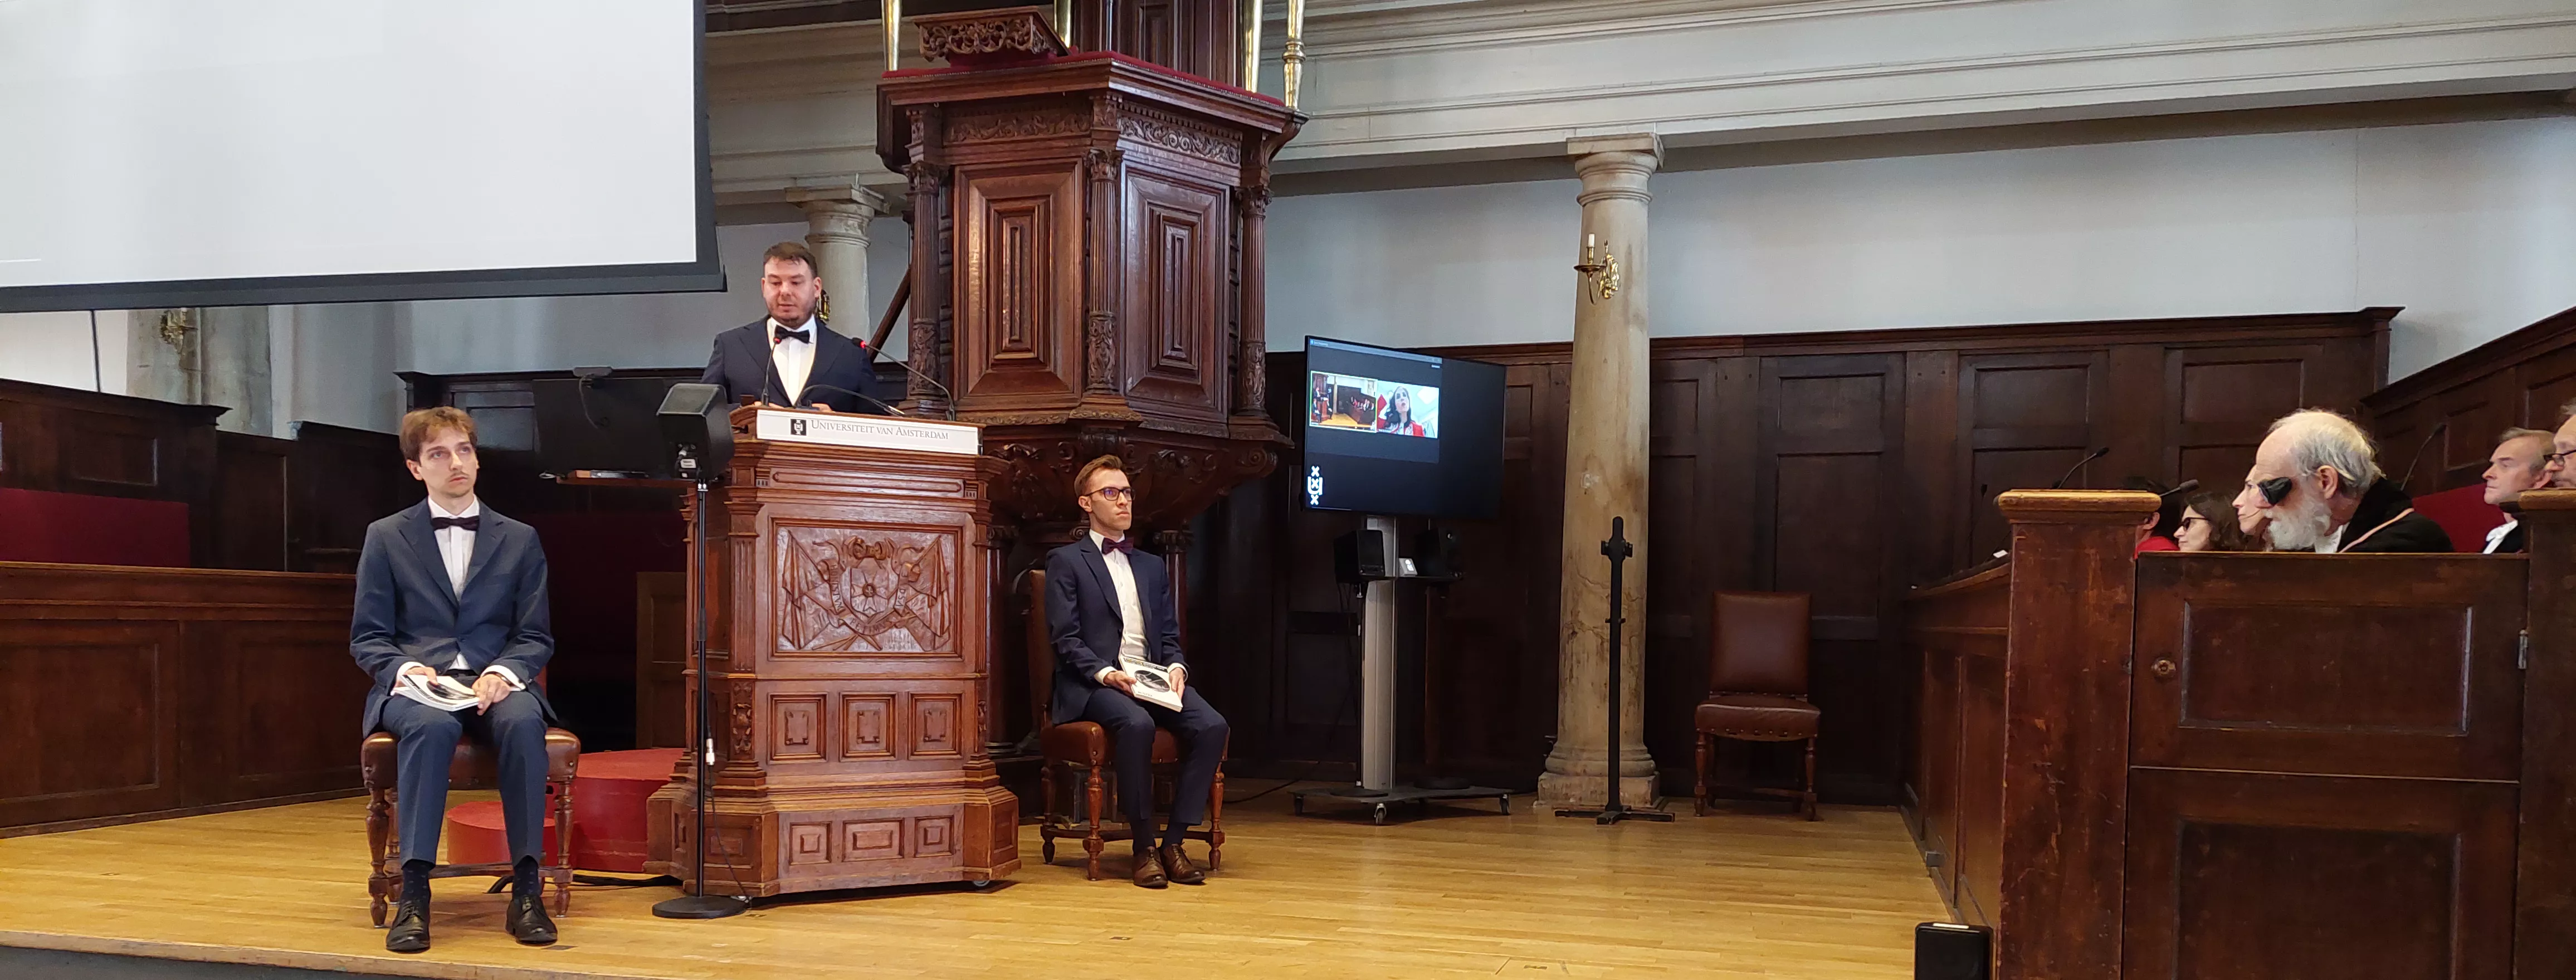 The Dutch PhD Defence: A Blend of Ceremony, Support, and Academic Rigor